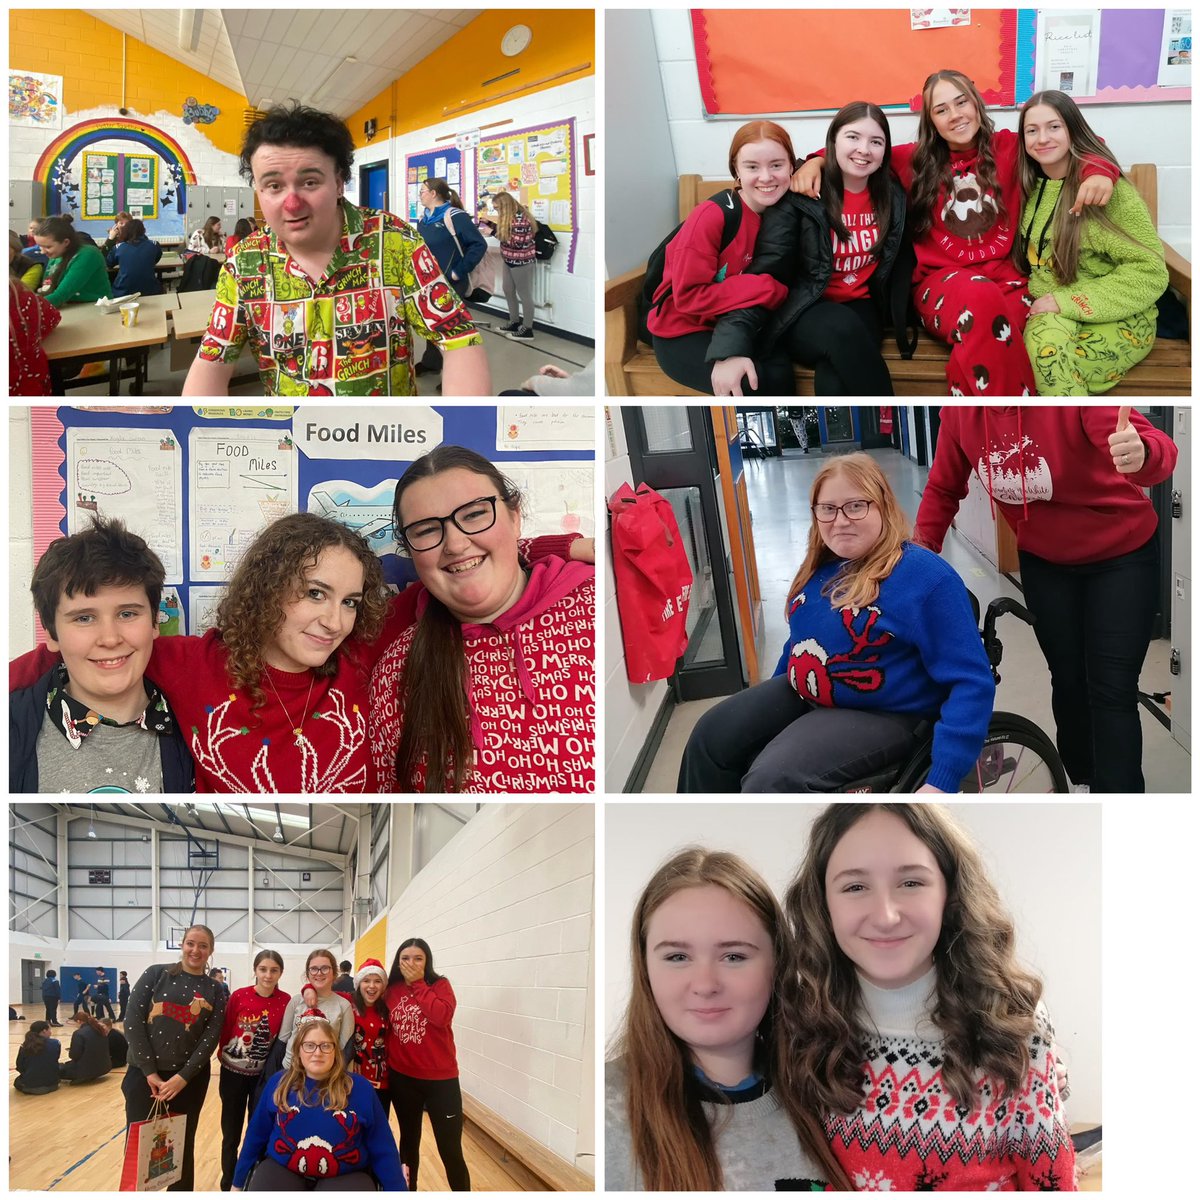 Coláiste an Átha getting into the Christmas Spirit for @Barnardos_IRL yesterday. Thank you to everyone for their support. @WWETBofficial #community #spiritofgiving 🎄⛄️